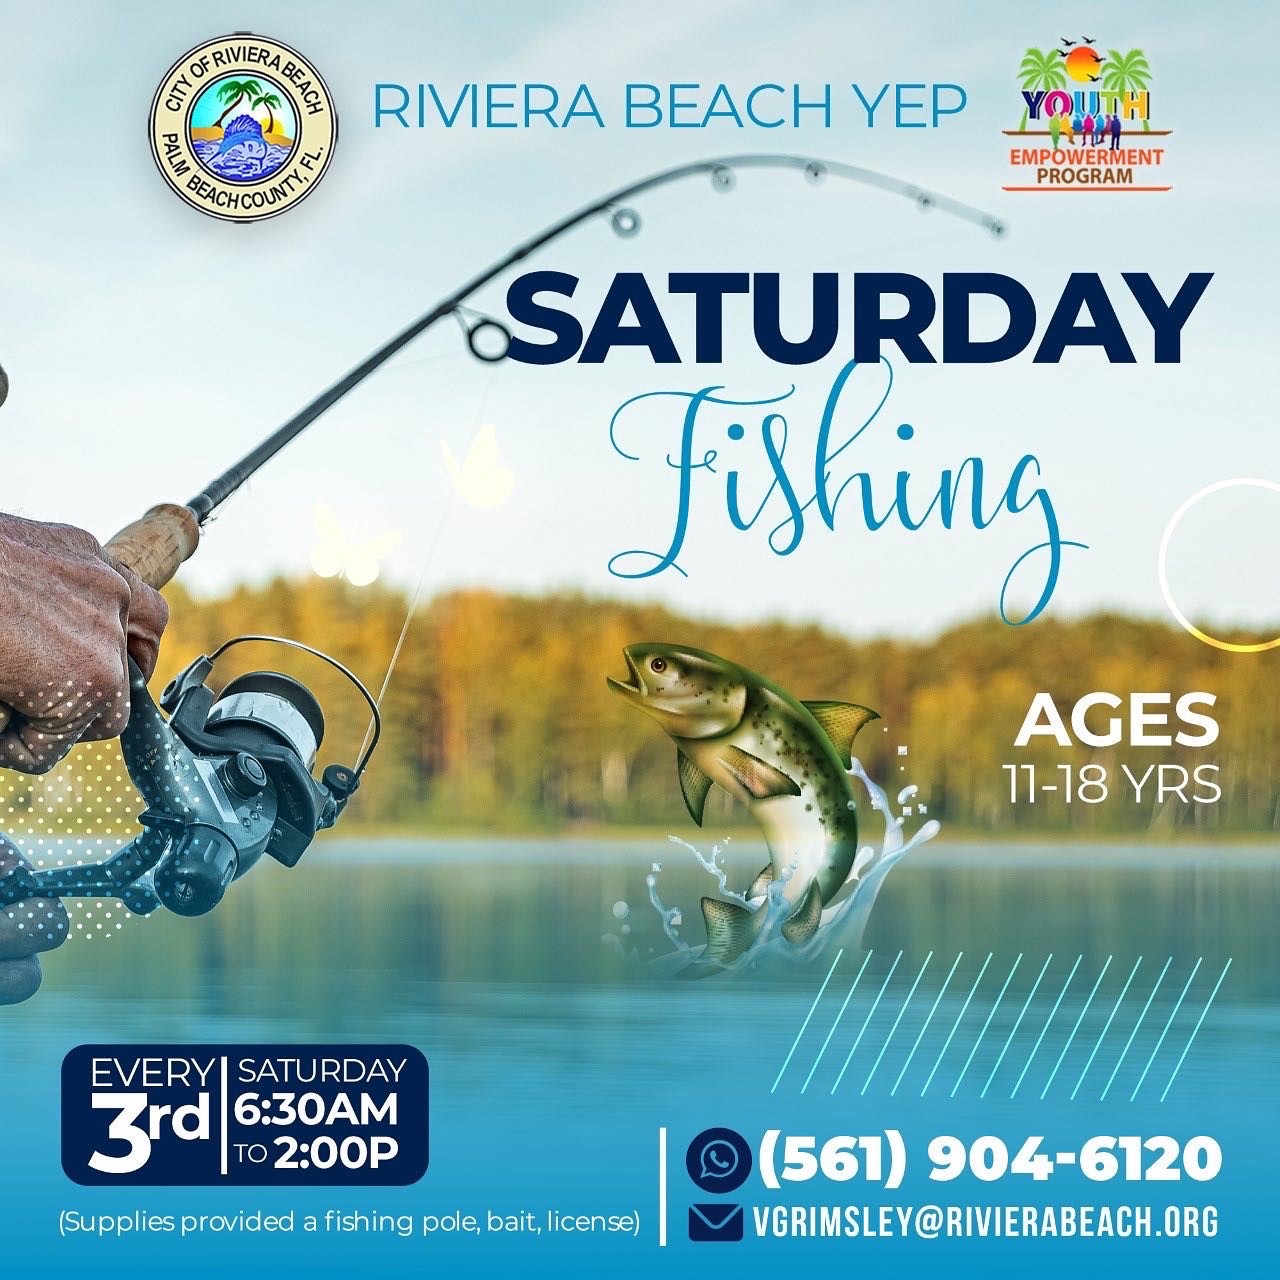 RIVIERA BEACH YEP EMPOWERMENT PROGRAM o SATURDAY Fishing Je AGES 11-18 VRS EVERY SATURDAY 3rd 6:30AM TO 2:00P (Supplies provided a fishing pole, bait, license) (561 904-6120 VGRIMSLEY@RIVIERABEACH.ORG